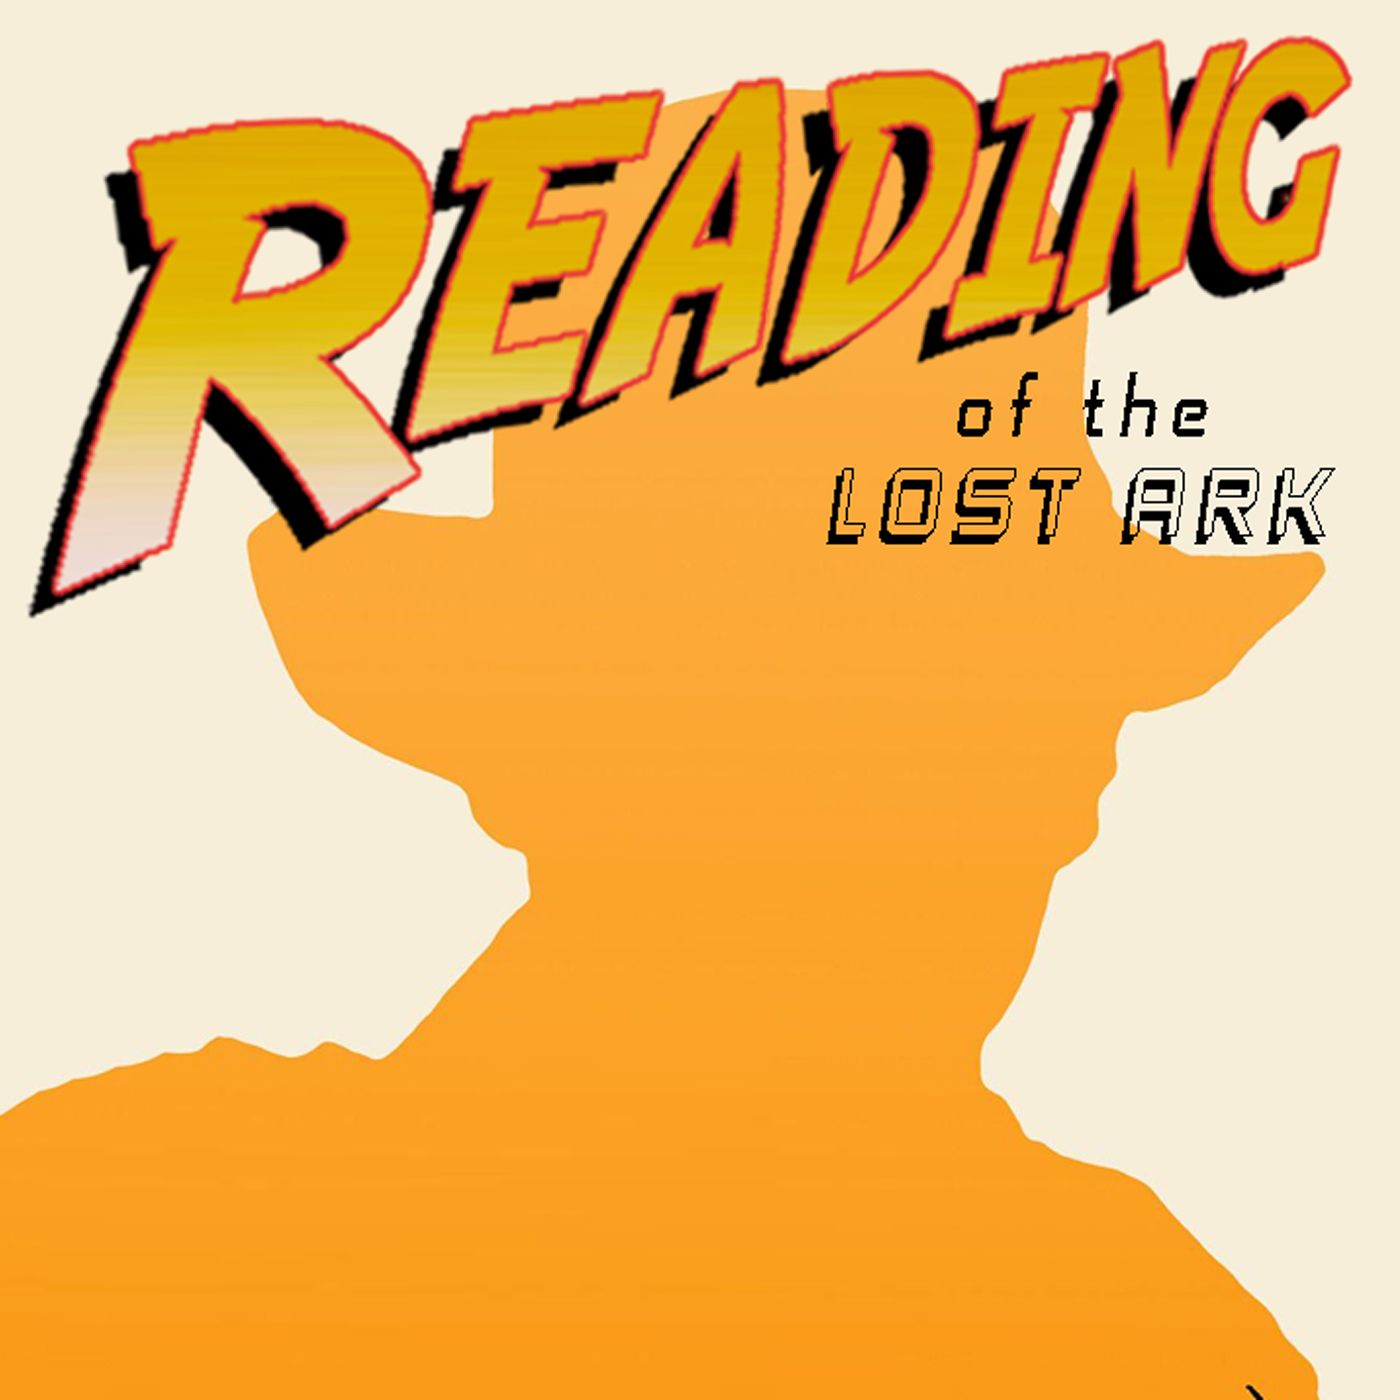 Special Report: Reading of the Lost Ark Pt. 2